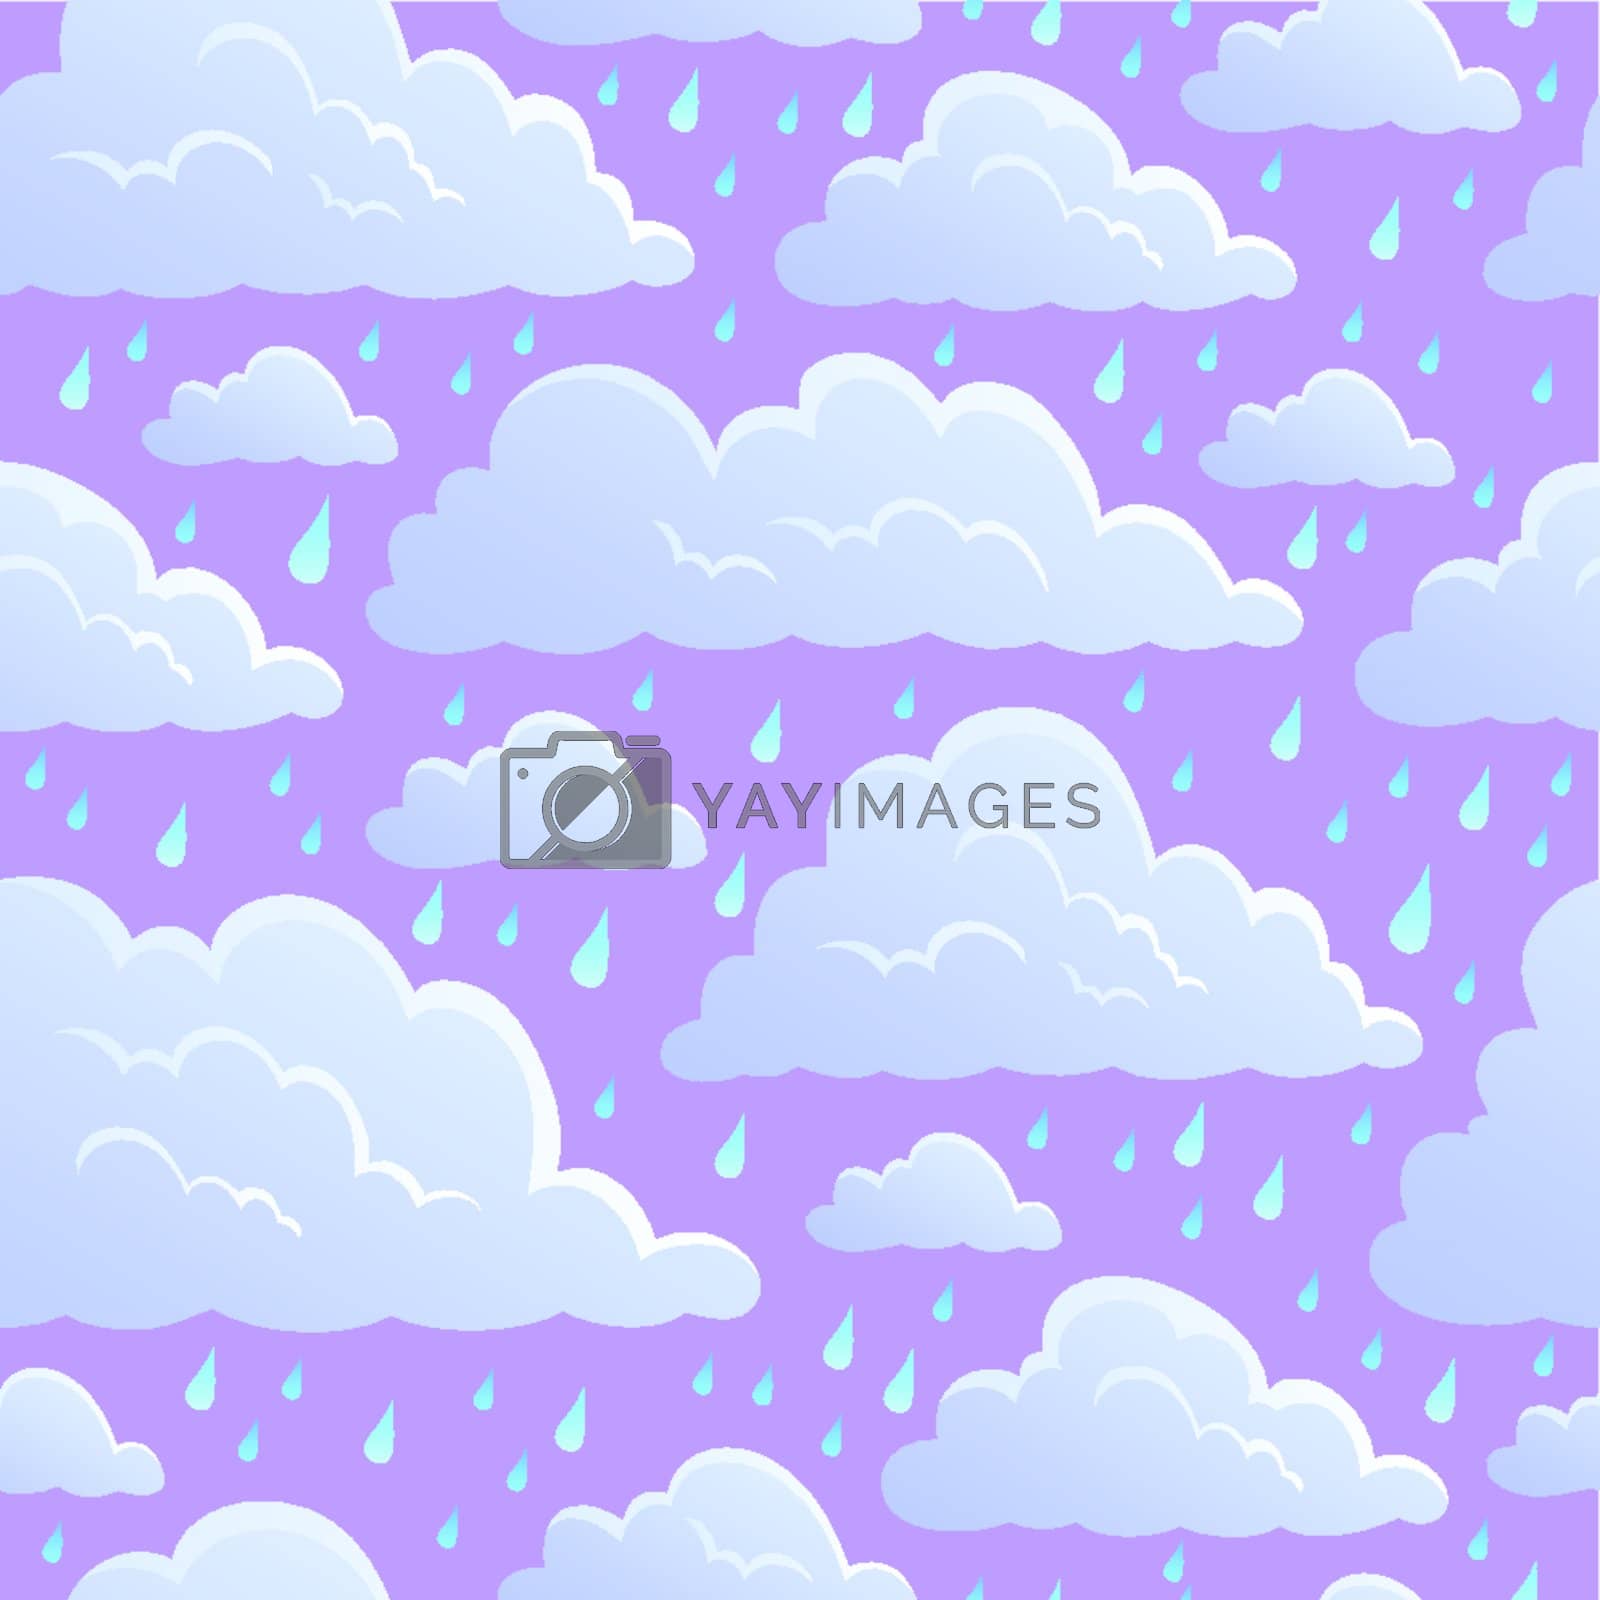 Royalty free image of Seamless background with clouds 5 by clairev